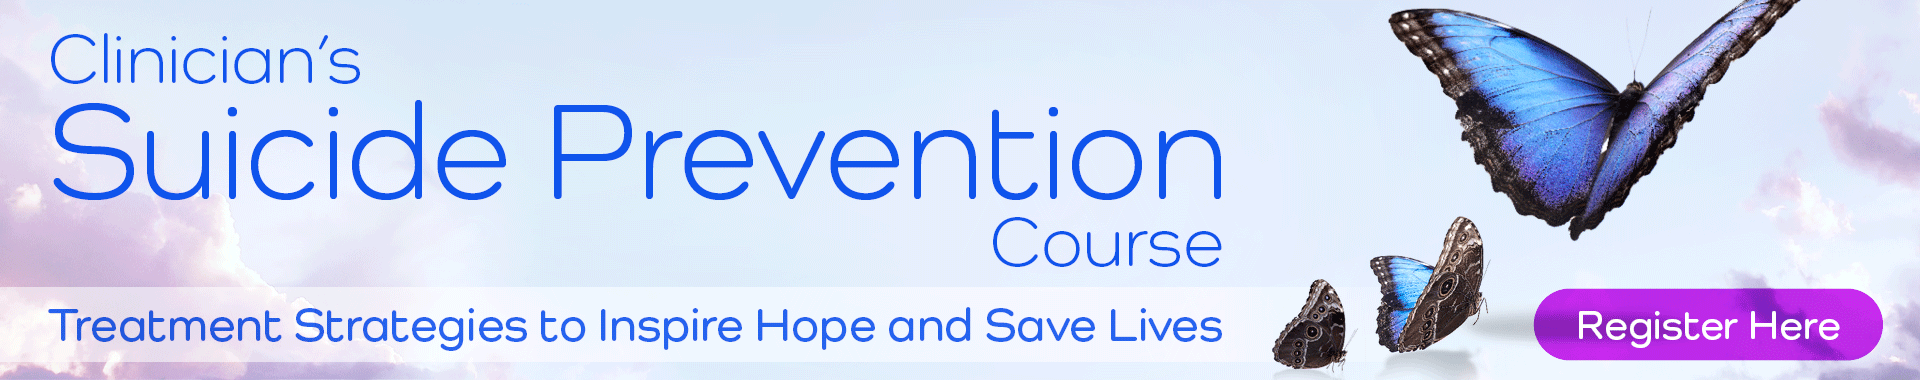 Clinician’s Suicide Prevention Course: Treatment Strategies to Inspire Hope and Save Lives